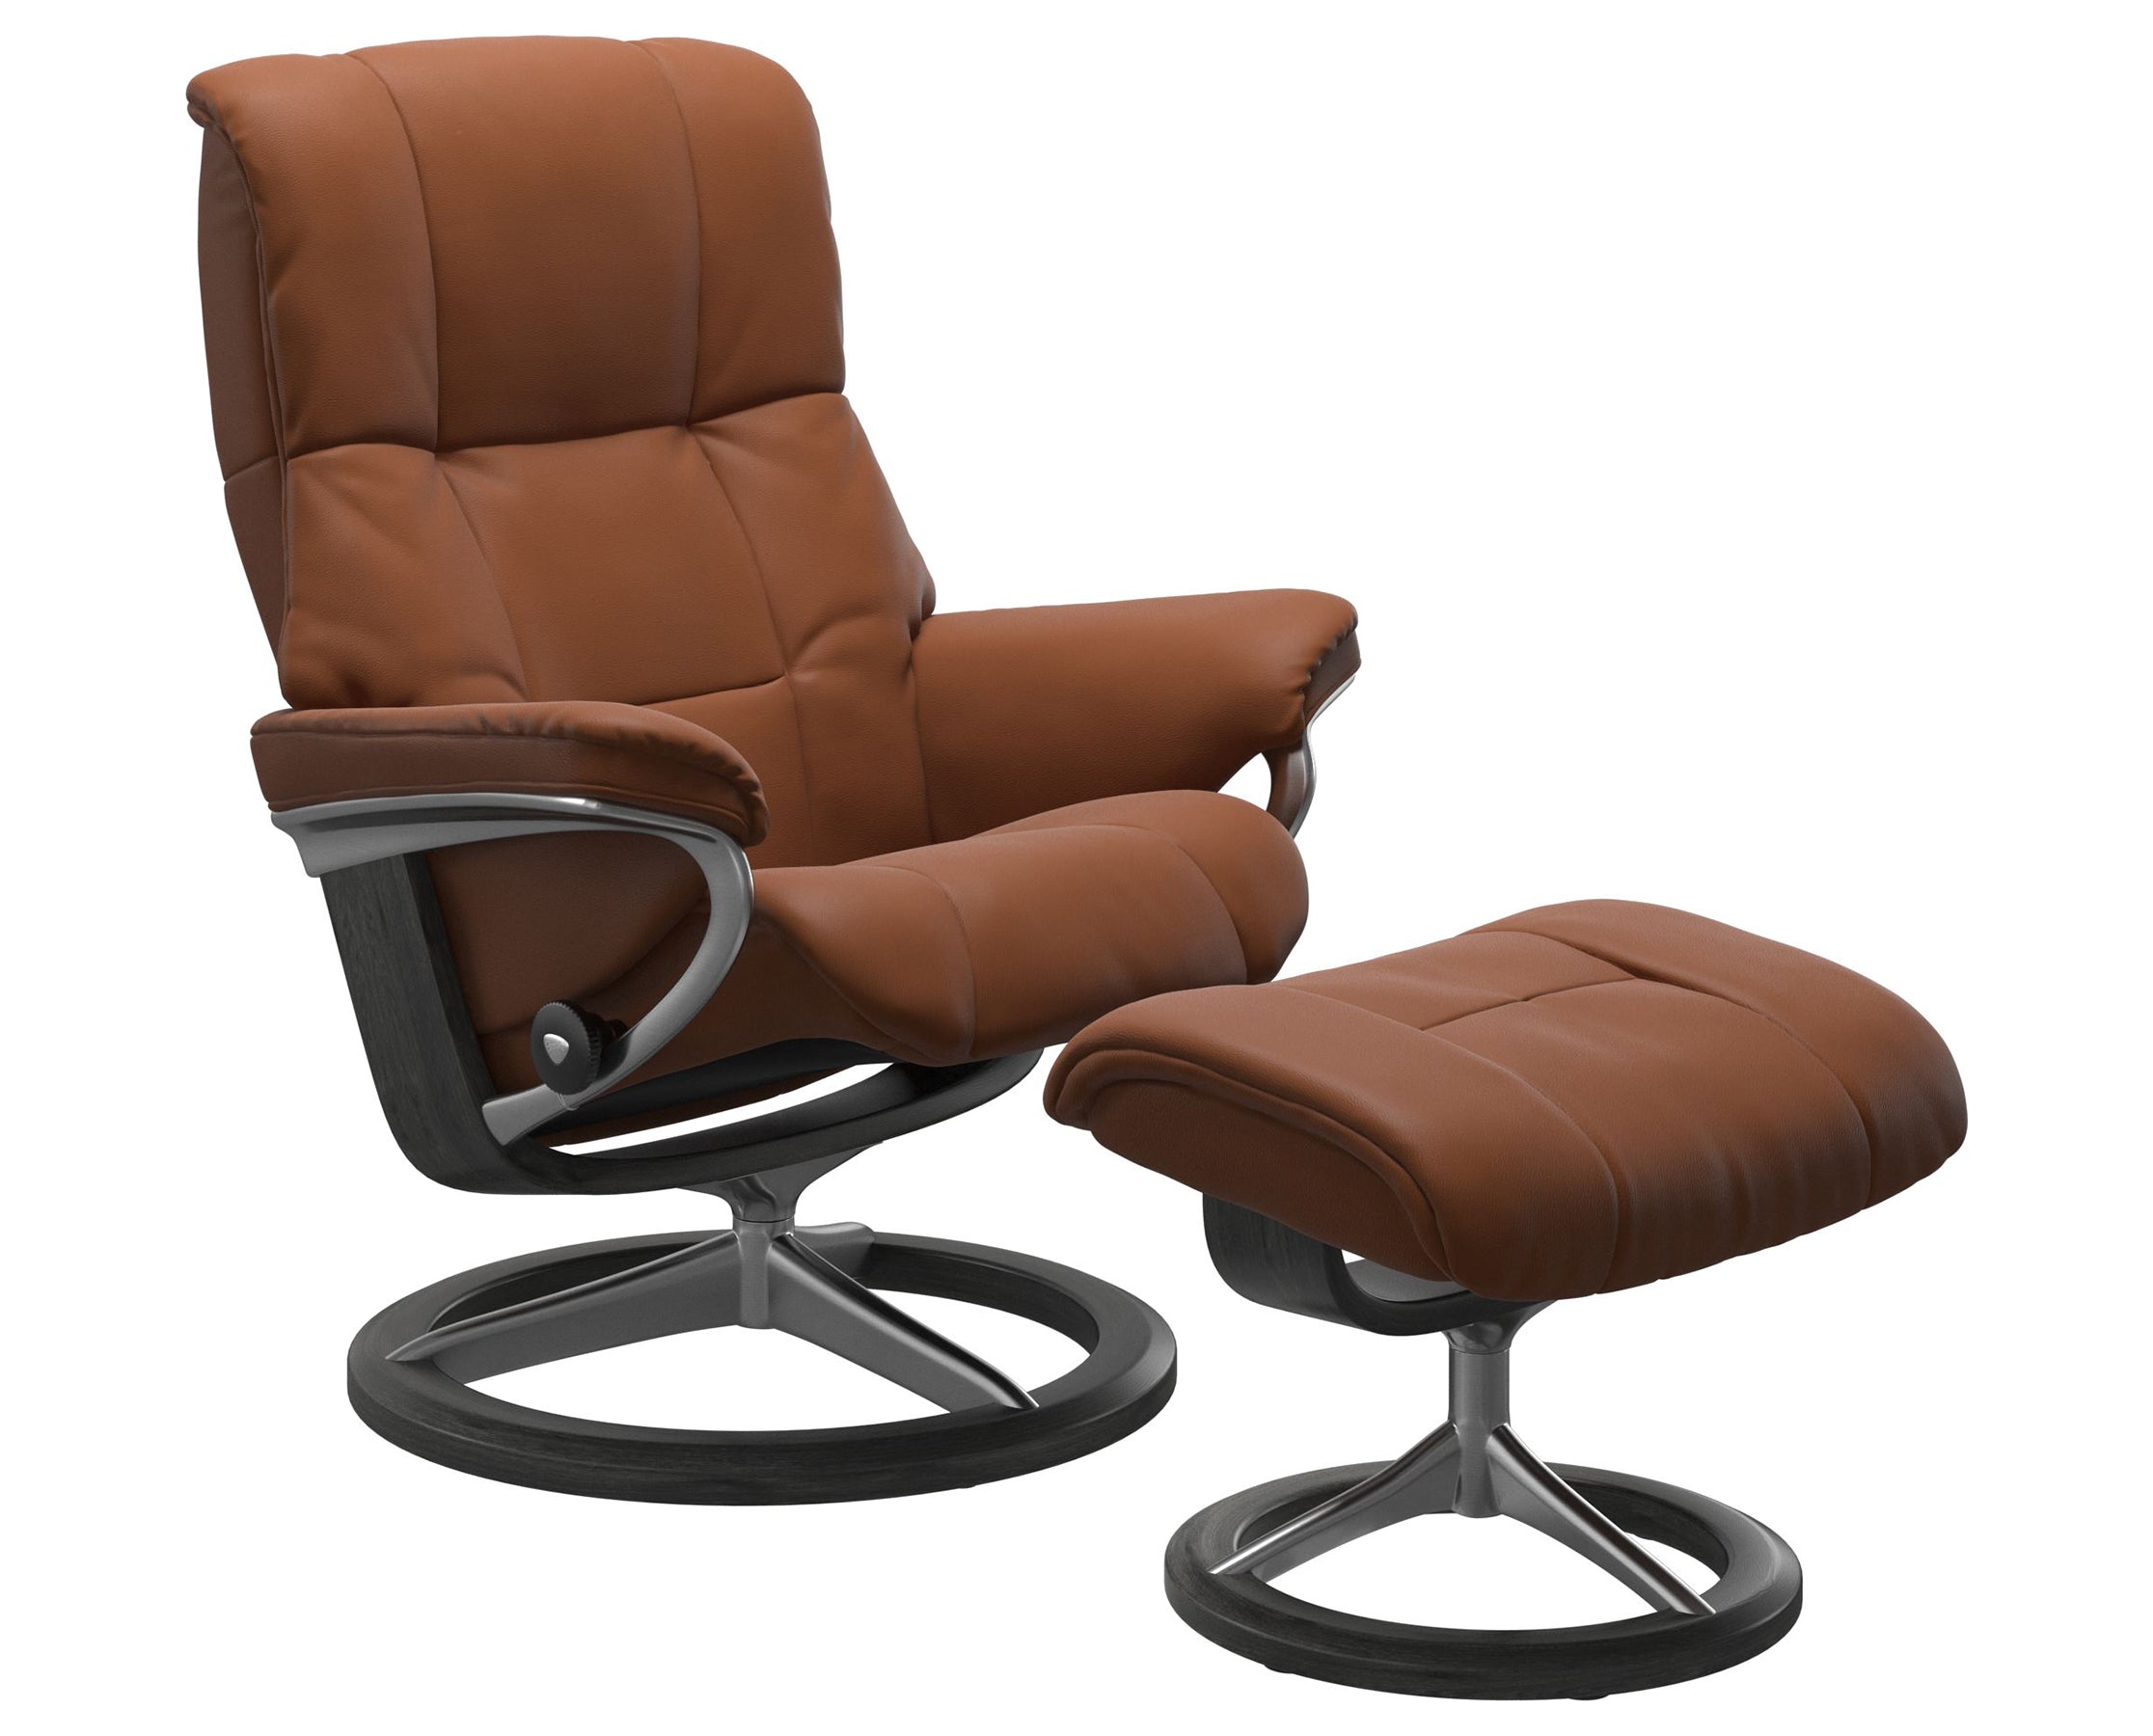 Paloma Leather New Cognac S/M/L and Grey Base | Stressless Mayfair Signature Recliner | Valley Ridge Furniture